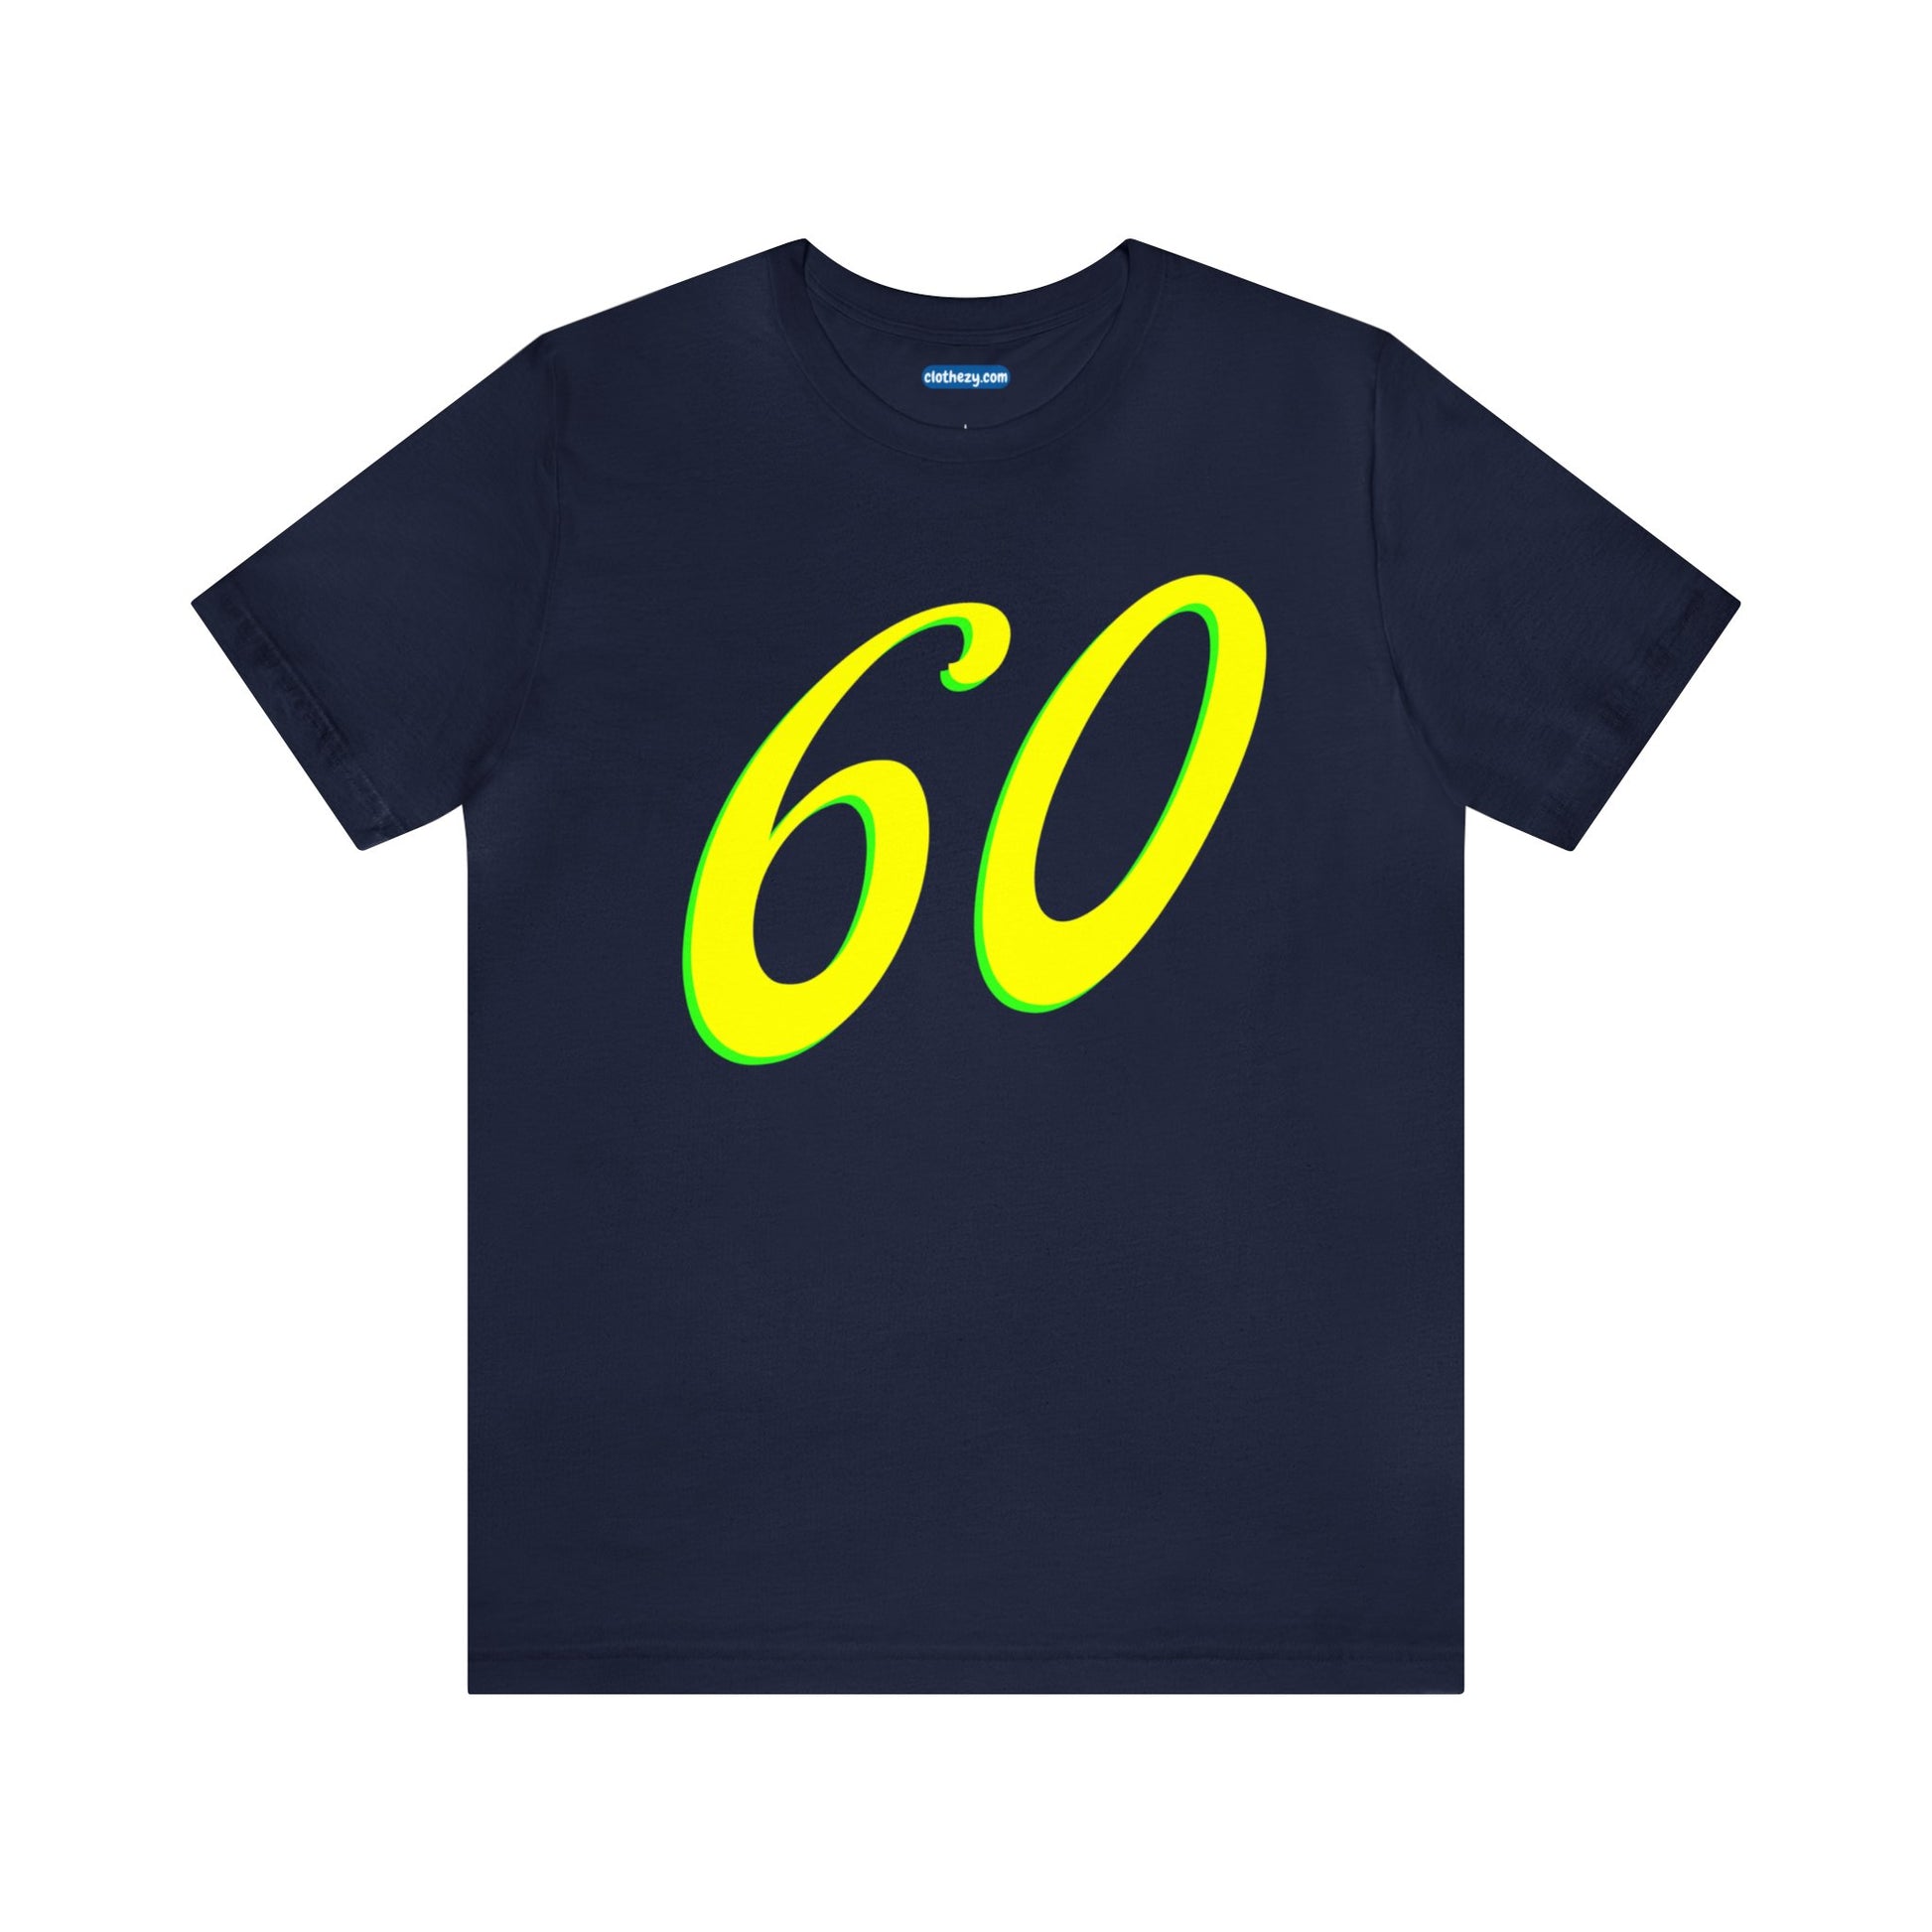 Number 60 Design - Soft Cotton Tee for birthdays and celebrations, Gift for friends and family, Multiple Options by clothezy.com in Navy Size Small - Buy Now